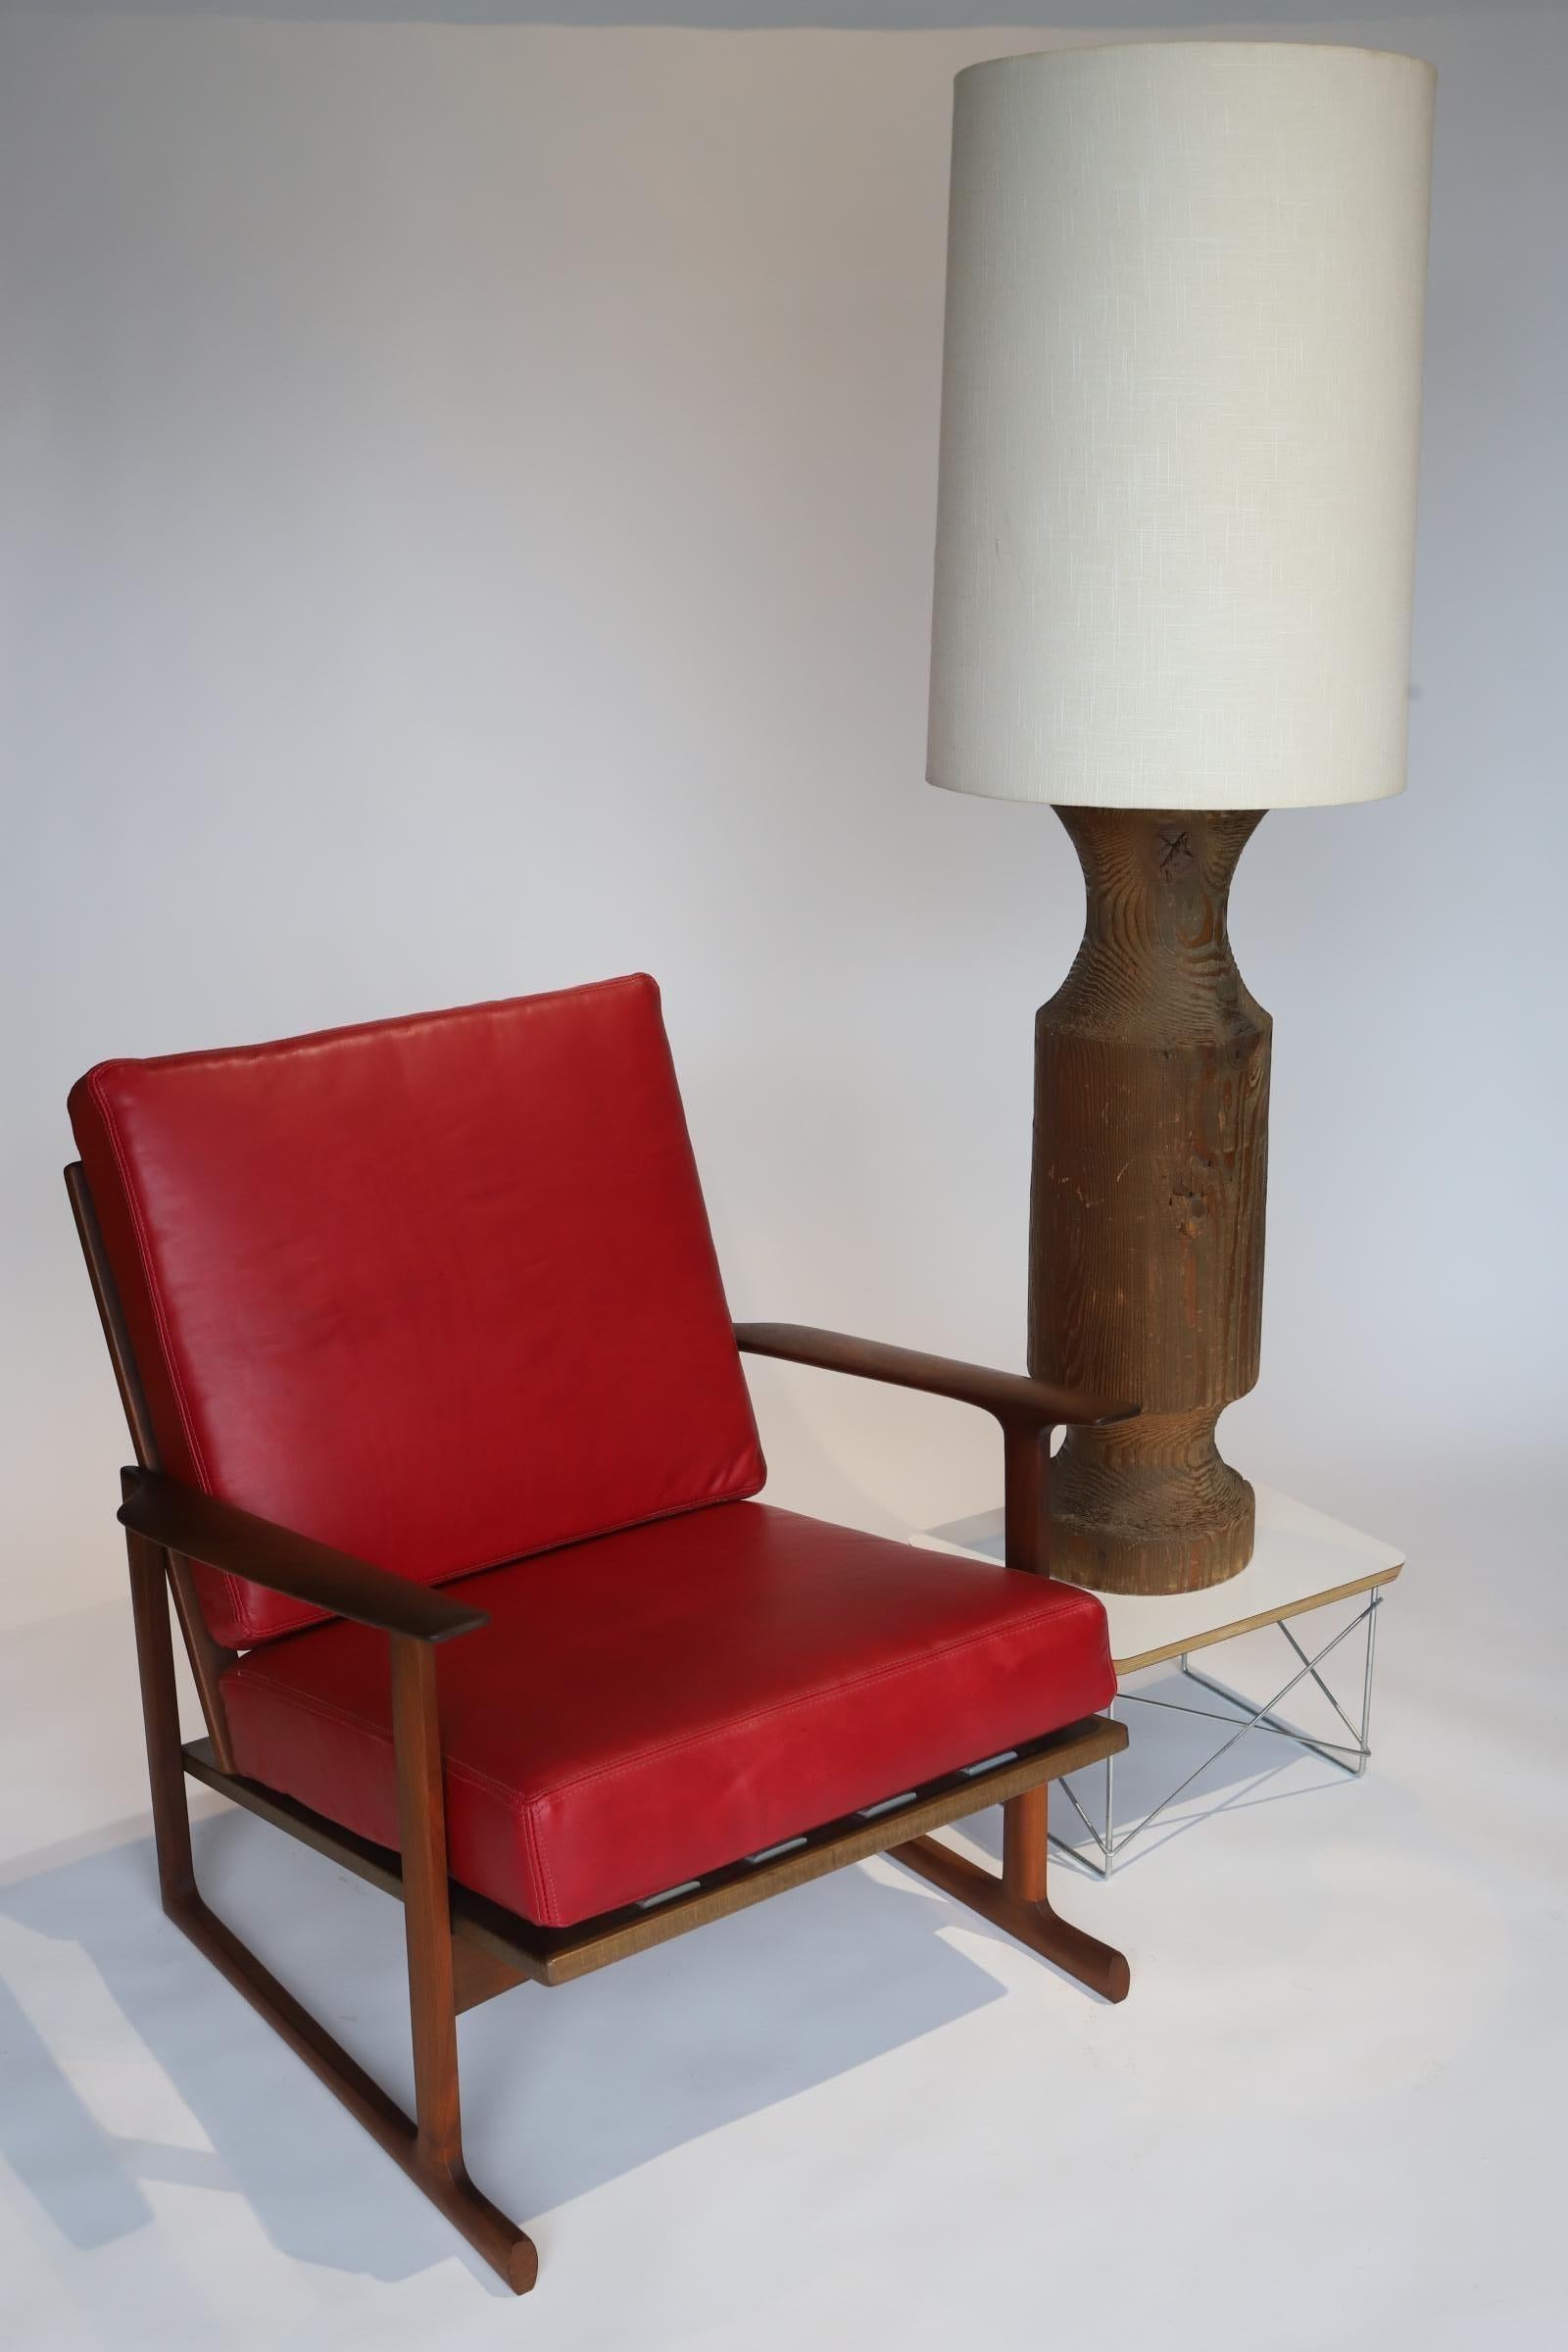 Unknown Extra Large Midcentury Turned Wood Lamp For Sale